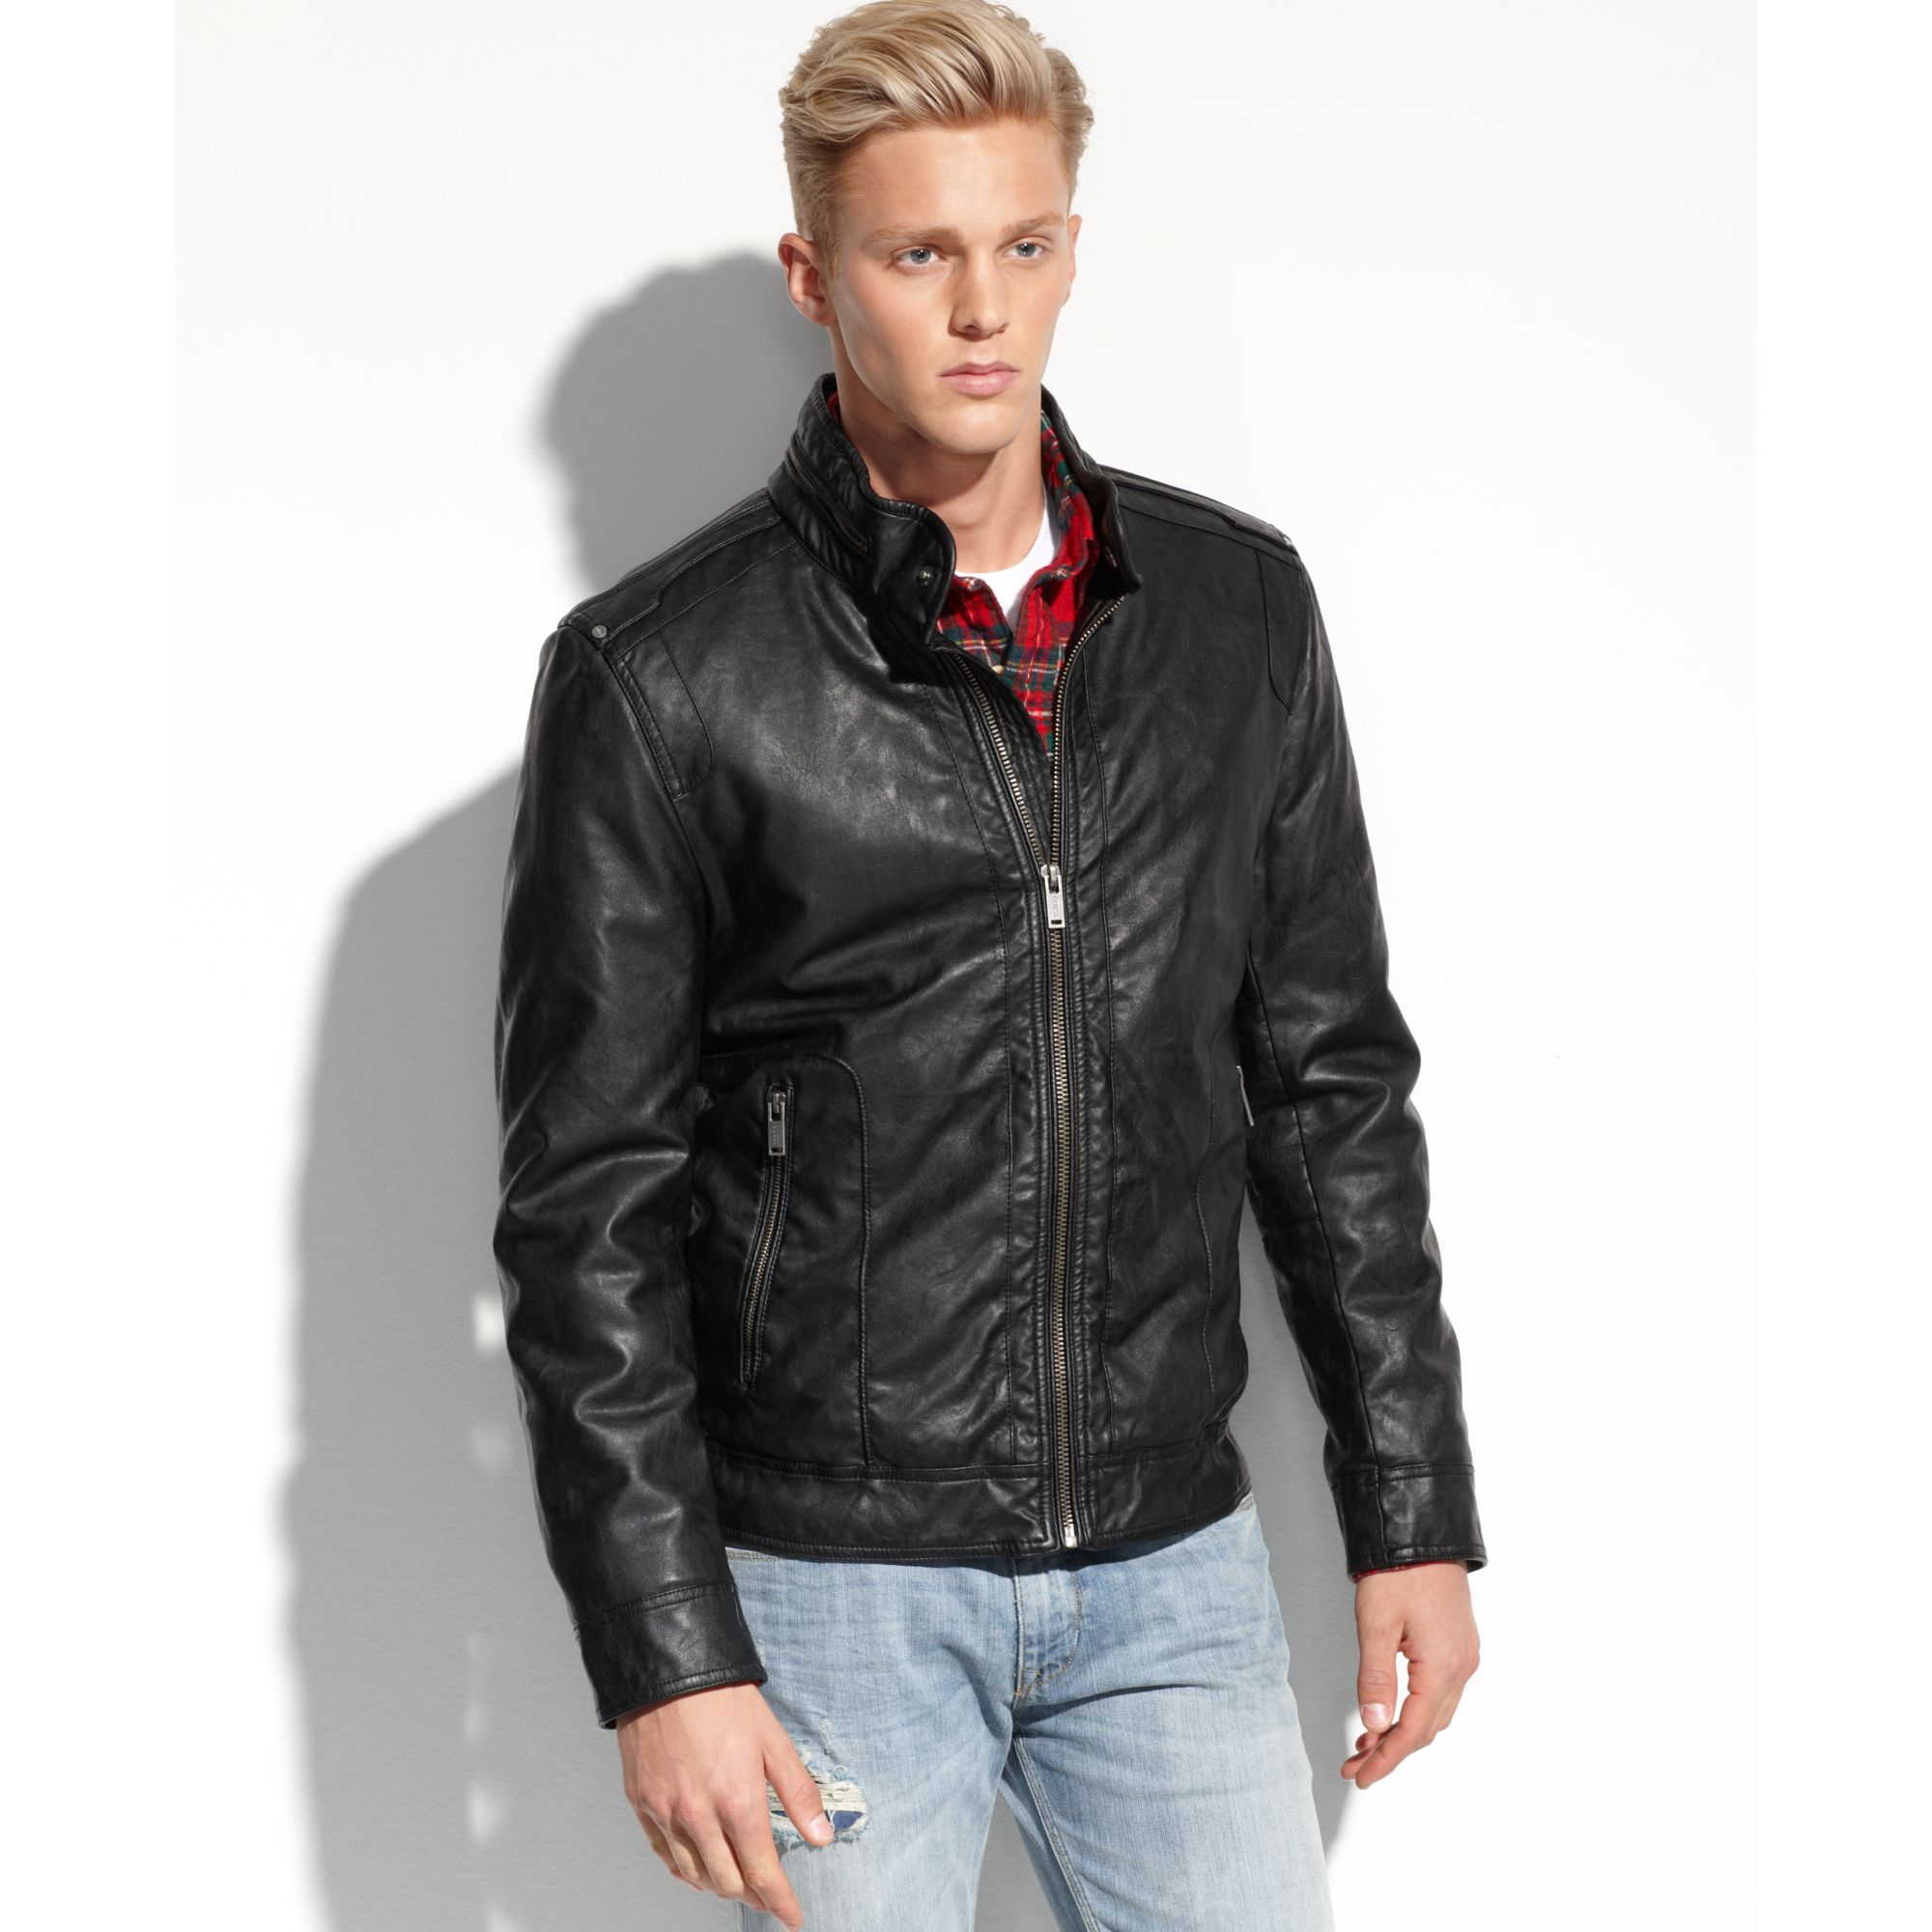 guess faux leather jacket mens